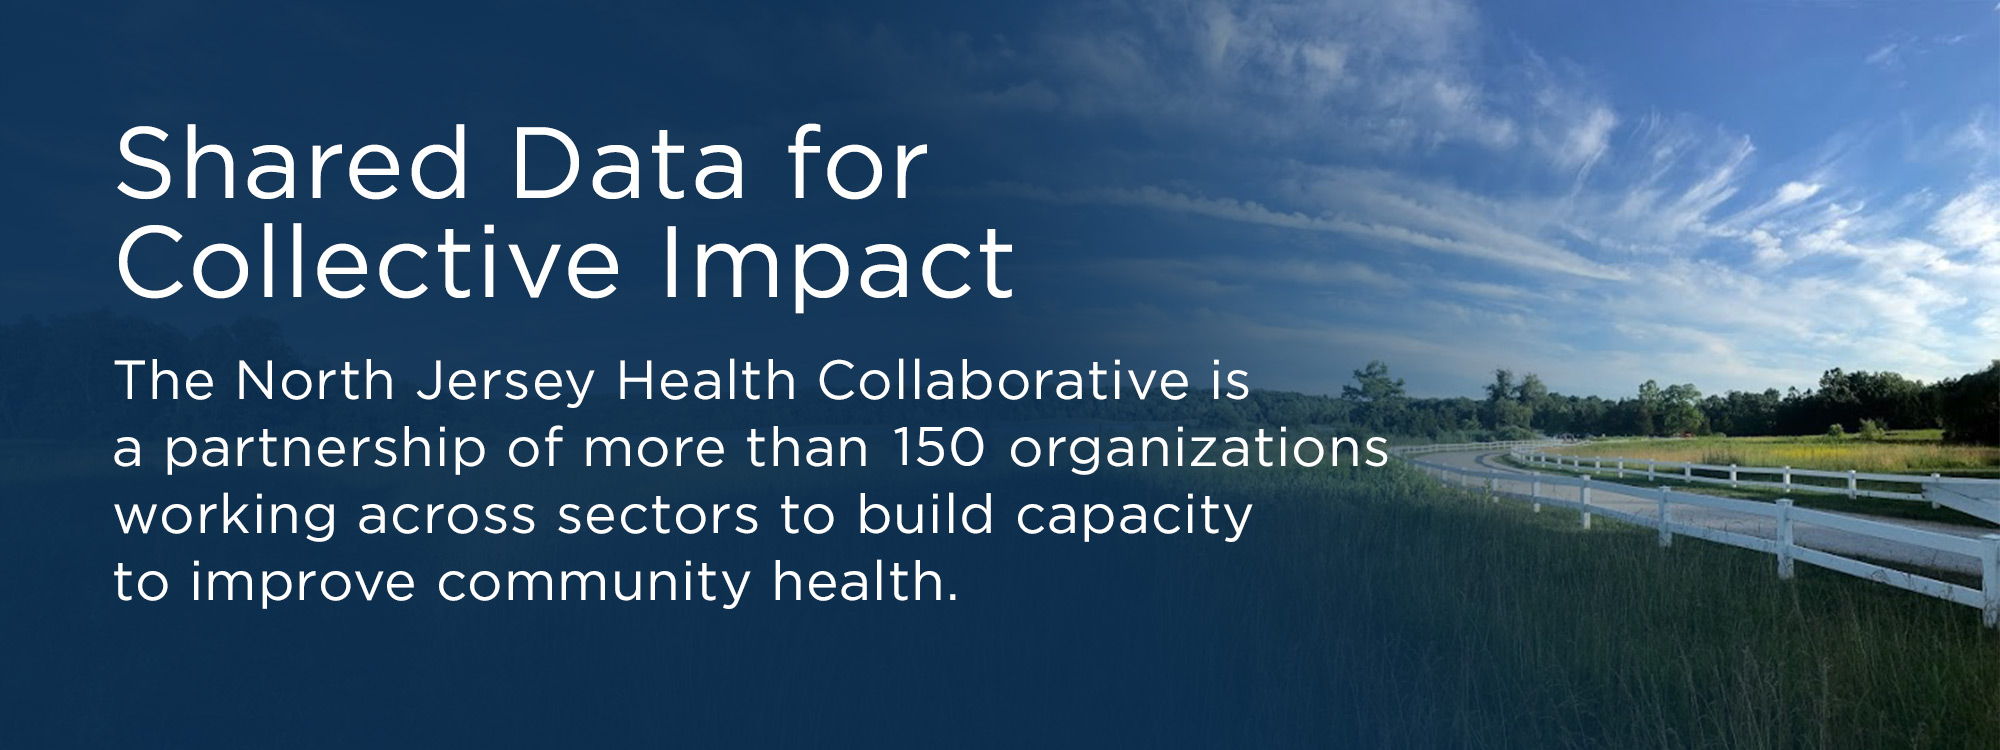 Learn more about North Jersey Health Collaborative